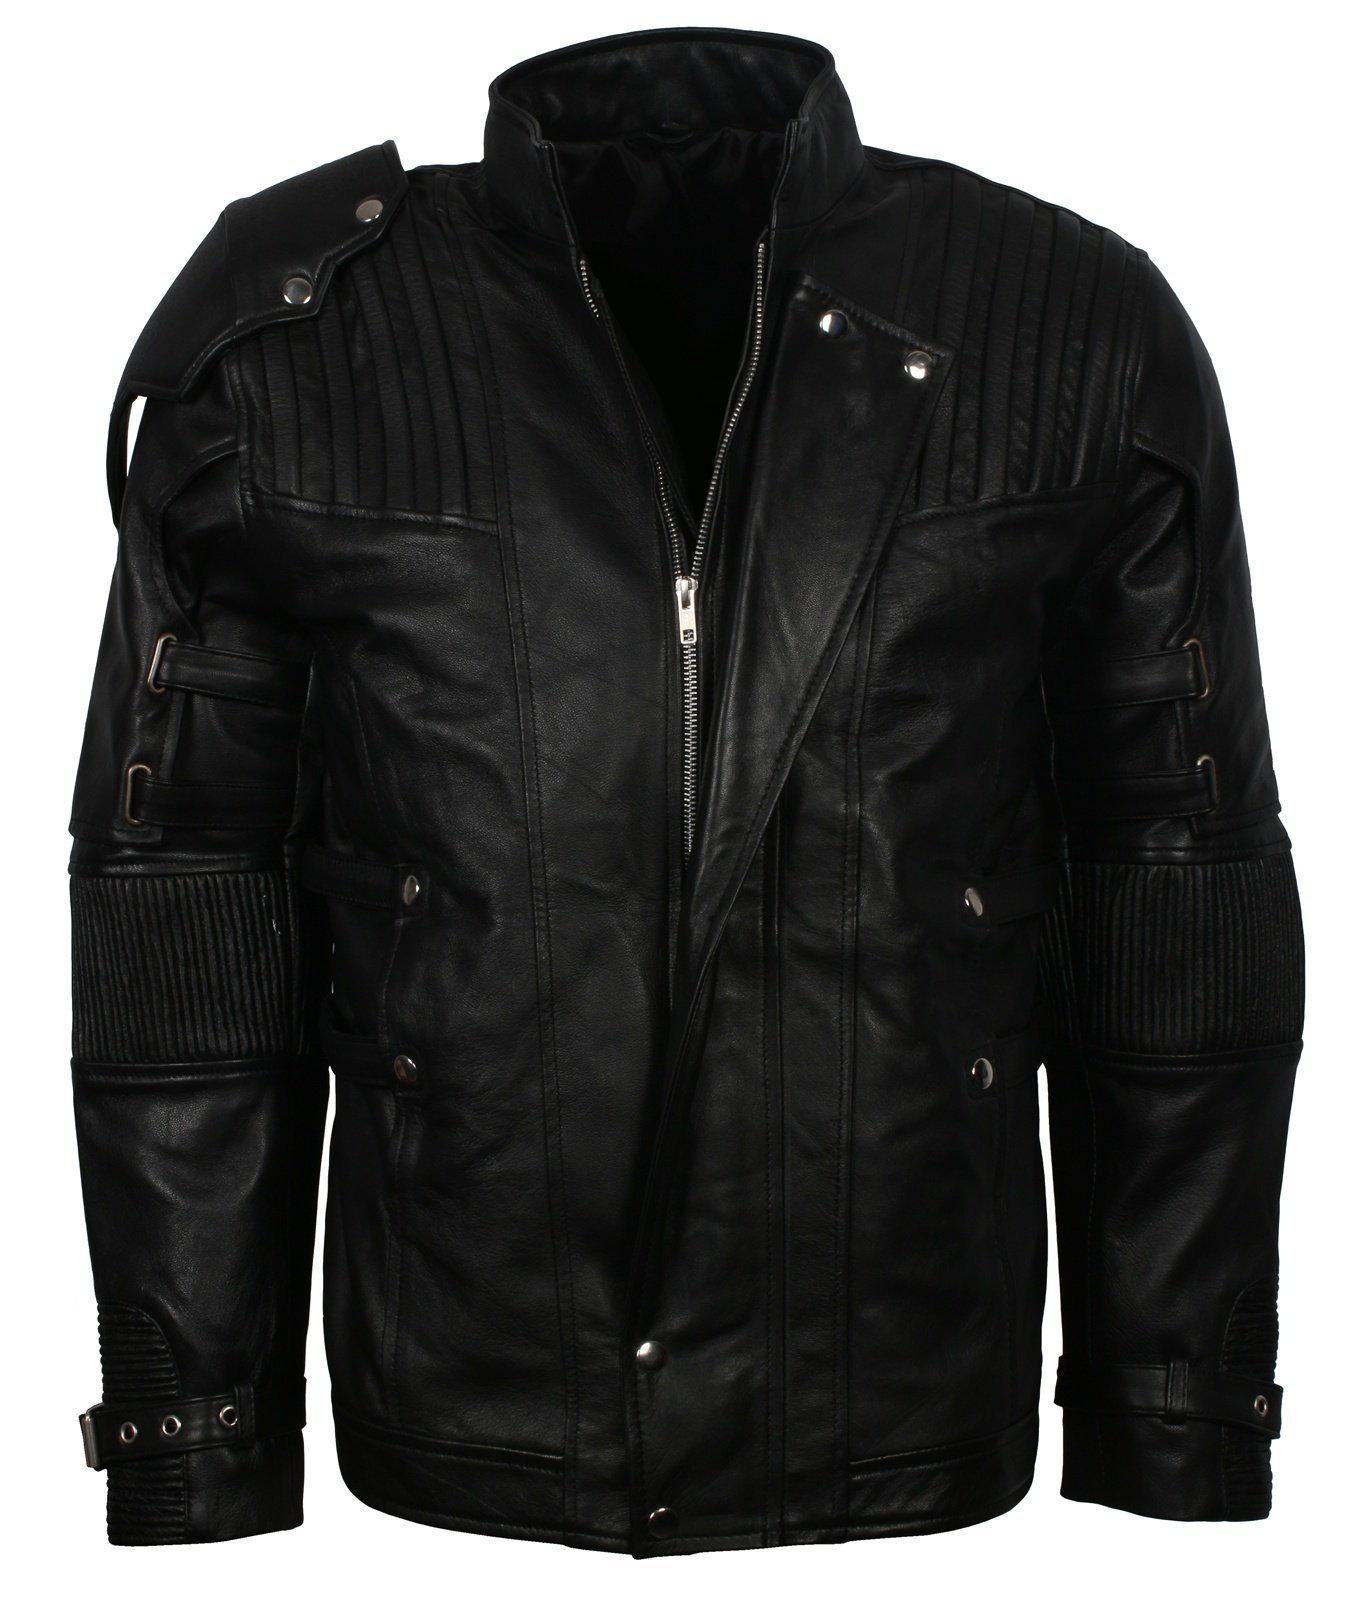 Guardians of the Galaxy Leather Jacket Black